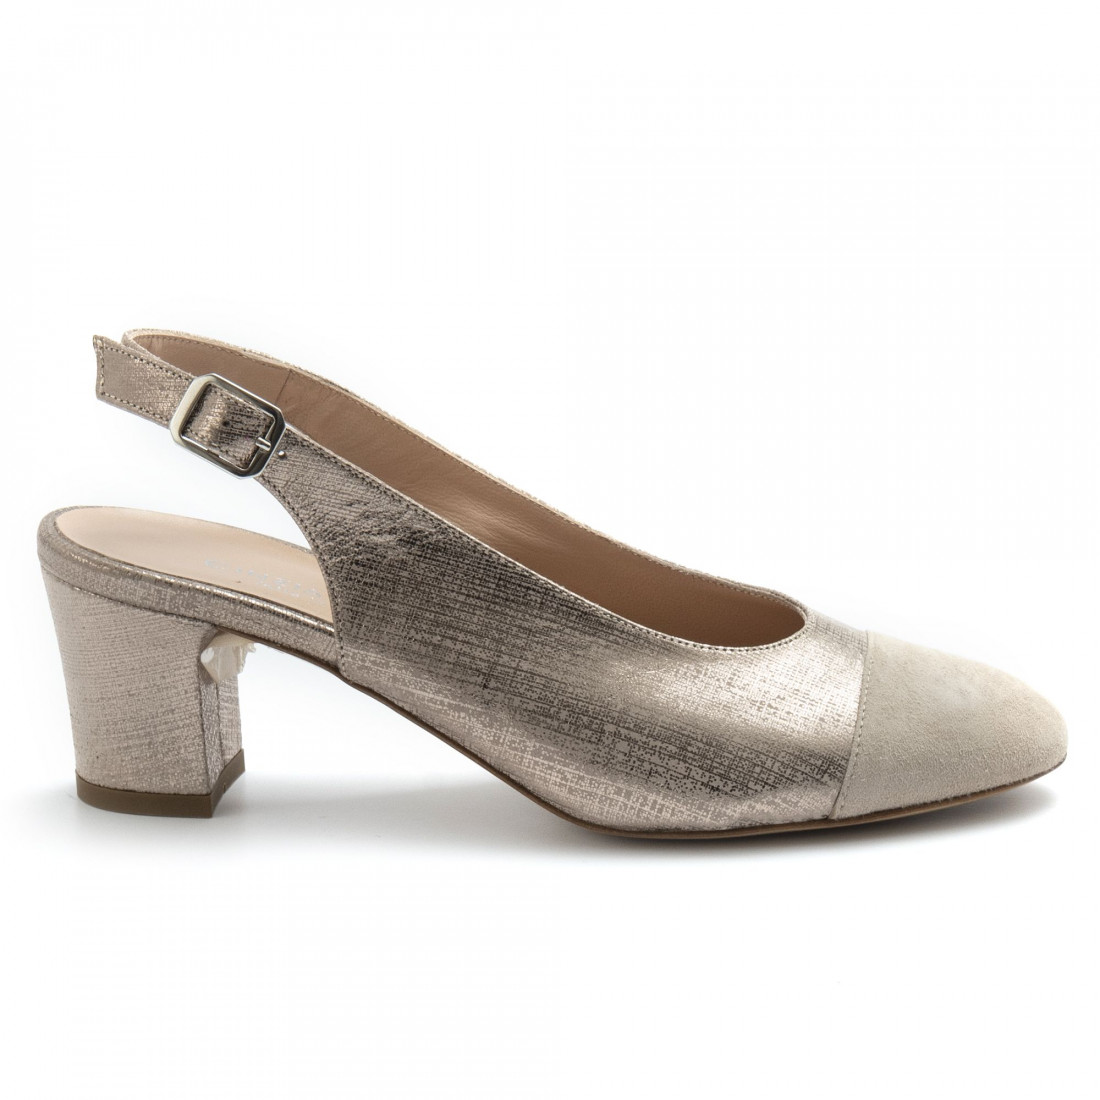 Cinzia Valle 8268 pumps in silver and beige leather